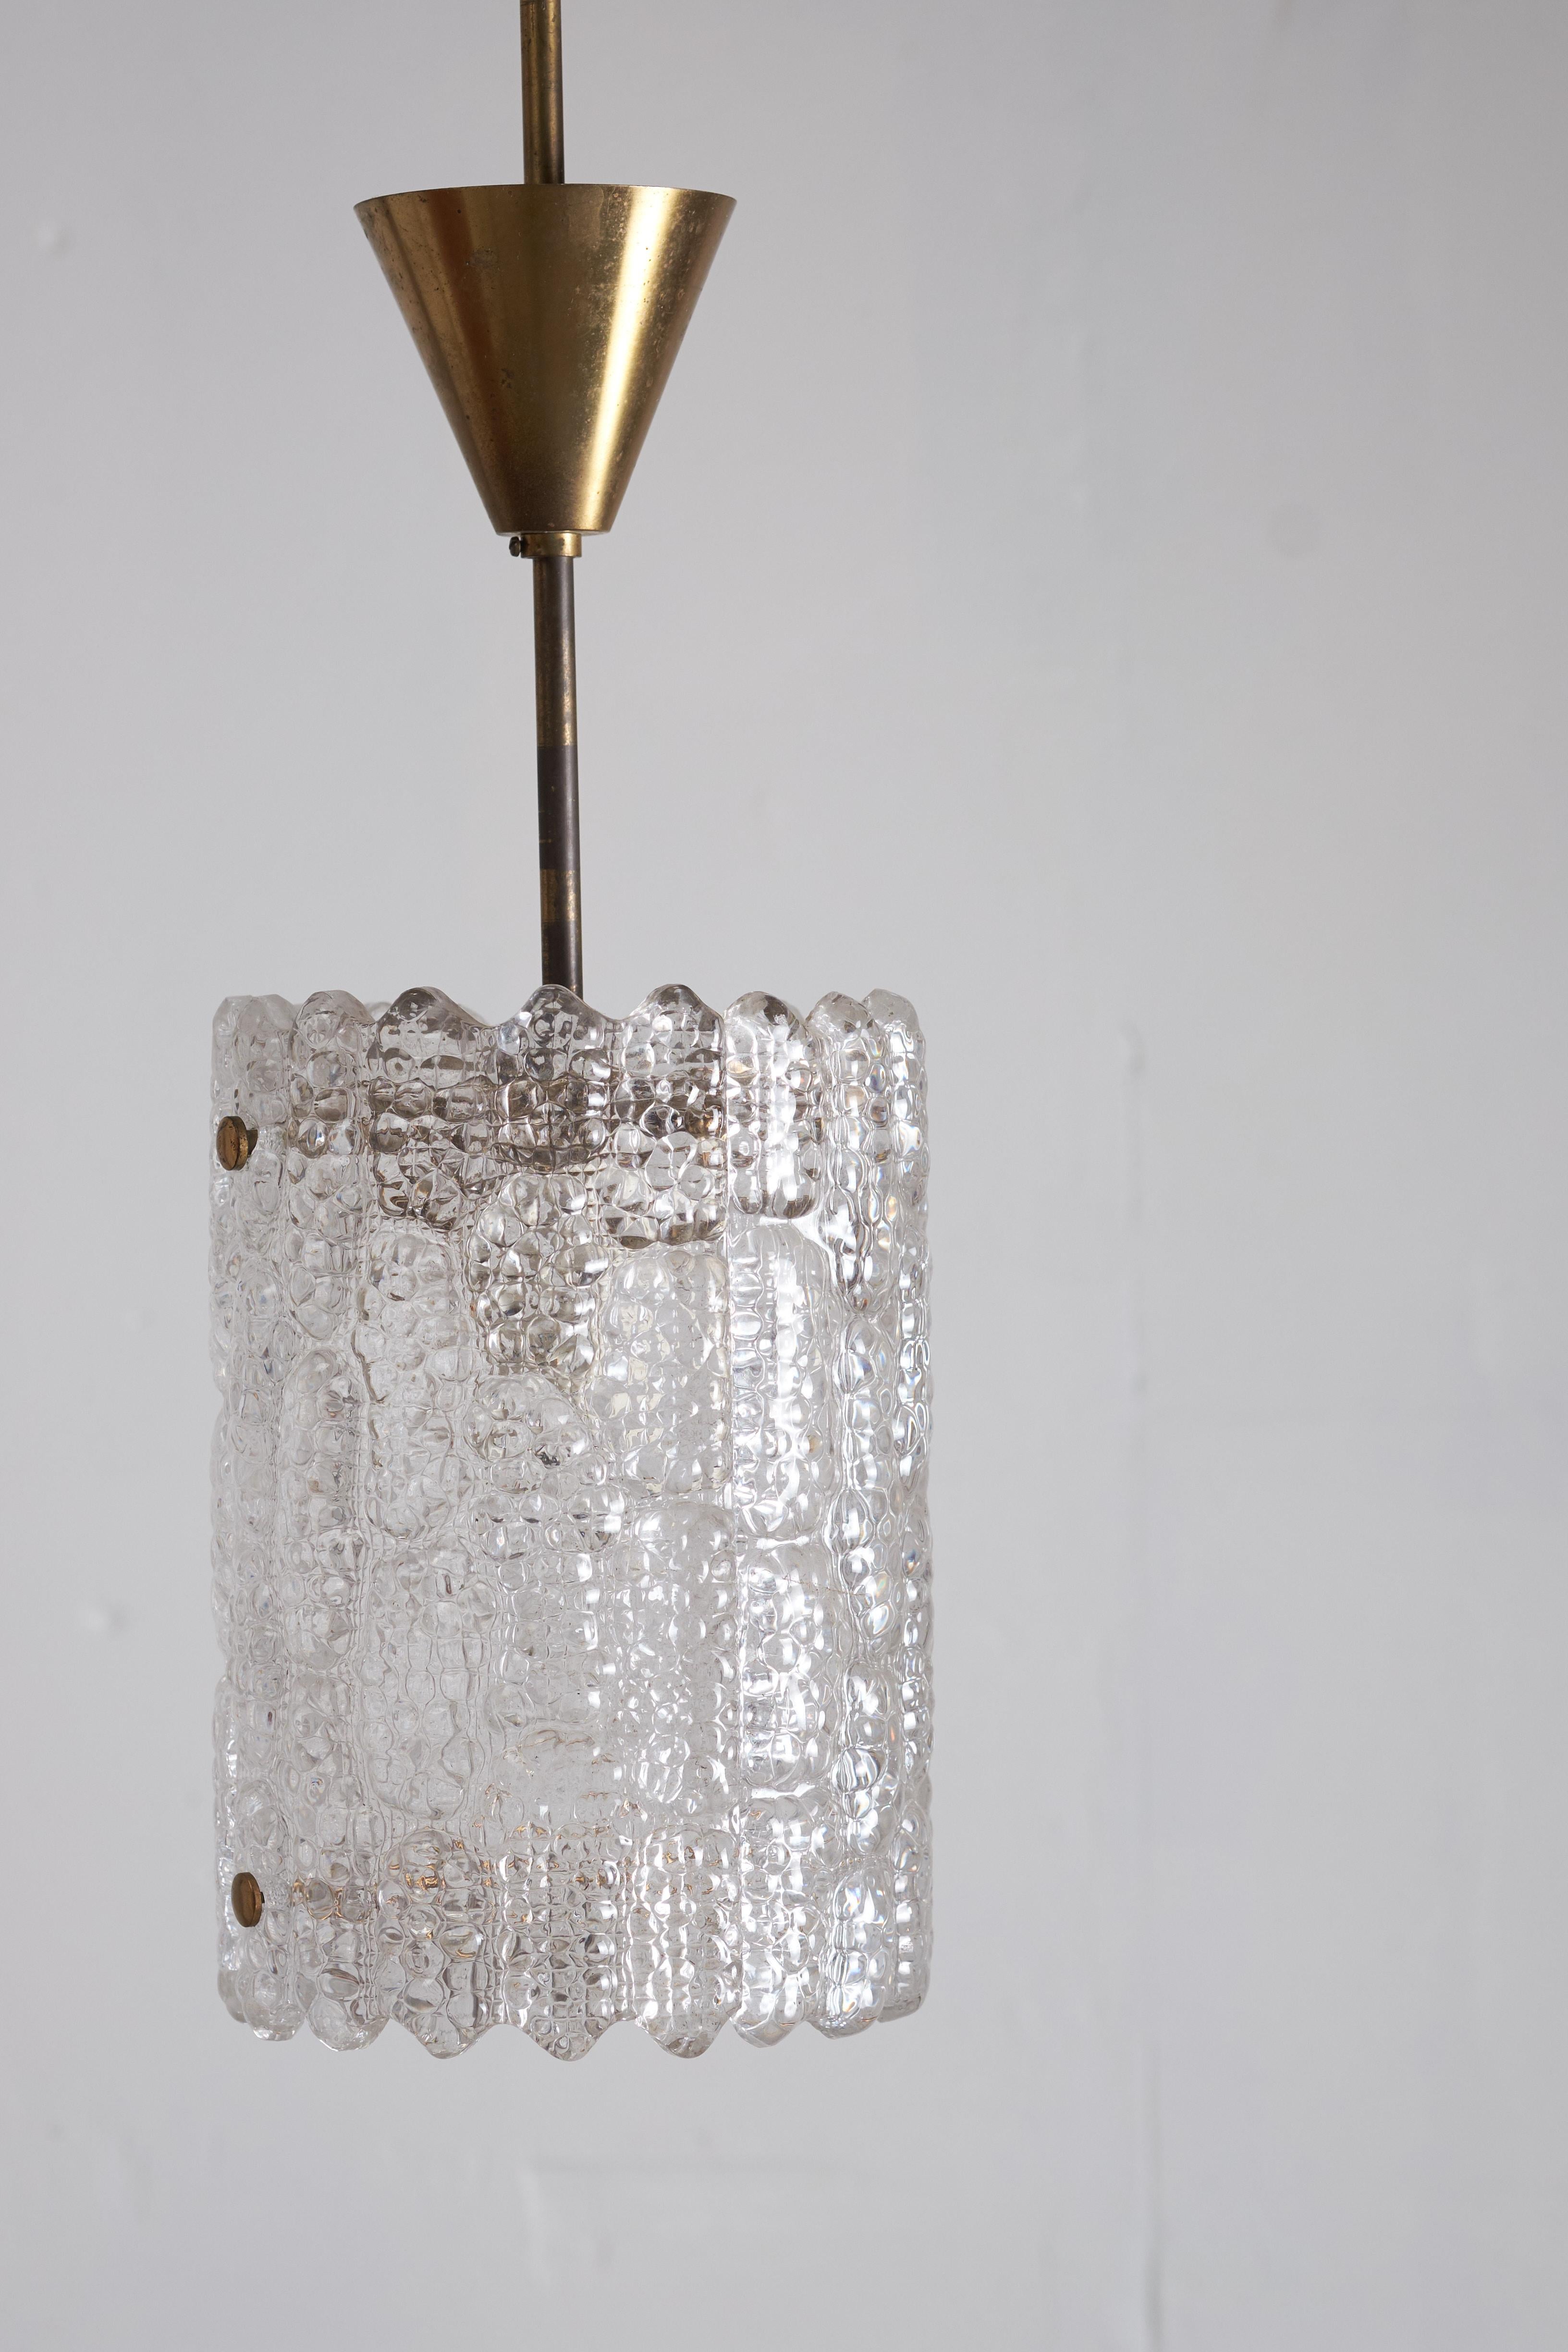 Pendant designed by Carl Fagerlund for Orrefors, Sweden, 1960s. This stunning lamp is made of brass with crystal glass as shade, which provides a nice a warm light. The lamp is in a very good condition with no chips in the glass.
A pendant which is